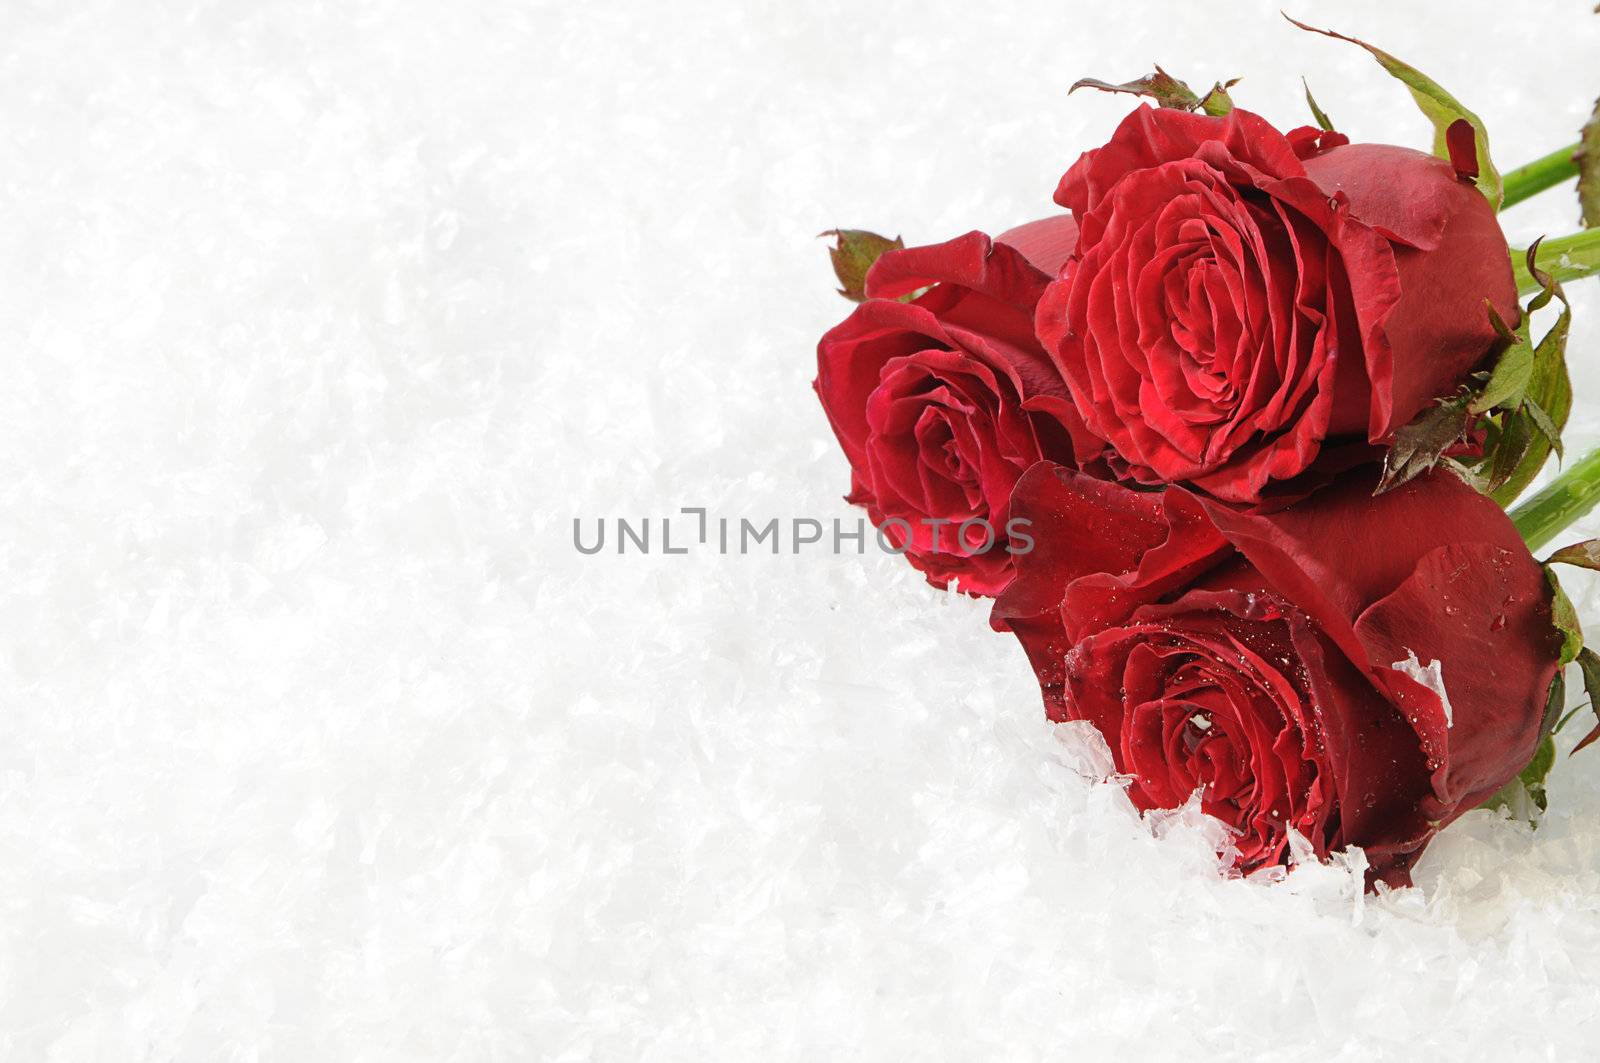 Three red roses on the white snow by dyoma